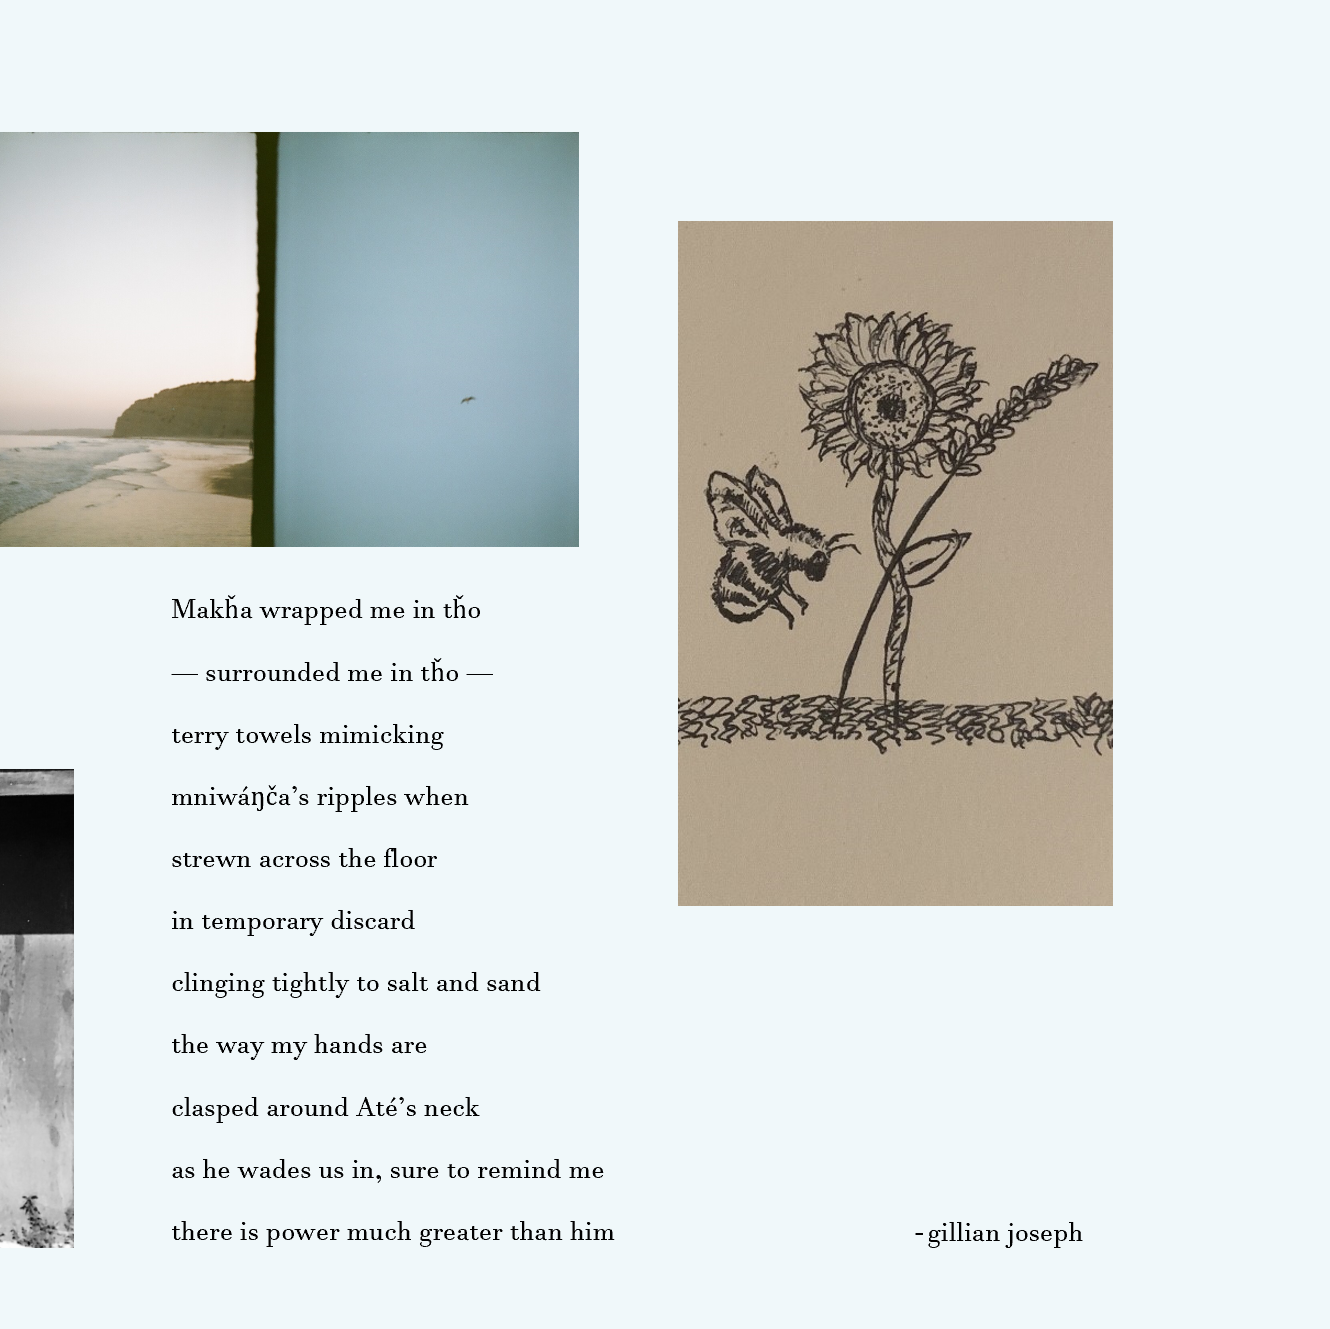 part of the the to be storztellers project bz Gillian Joseph. This picture features a poem as well as analogue photography and personal drawings by Gillian Joseph